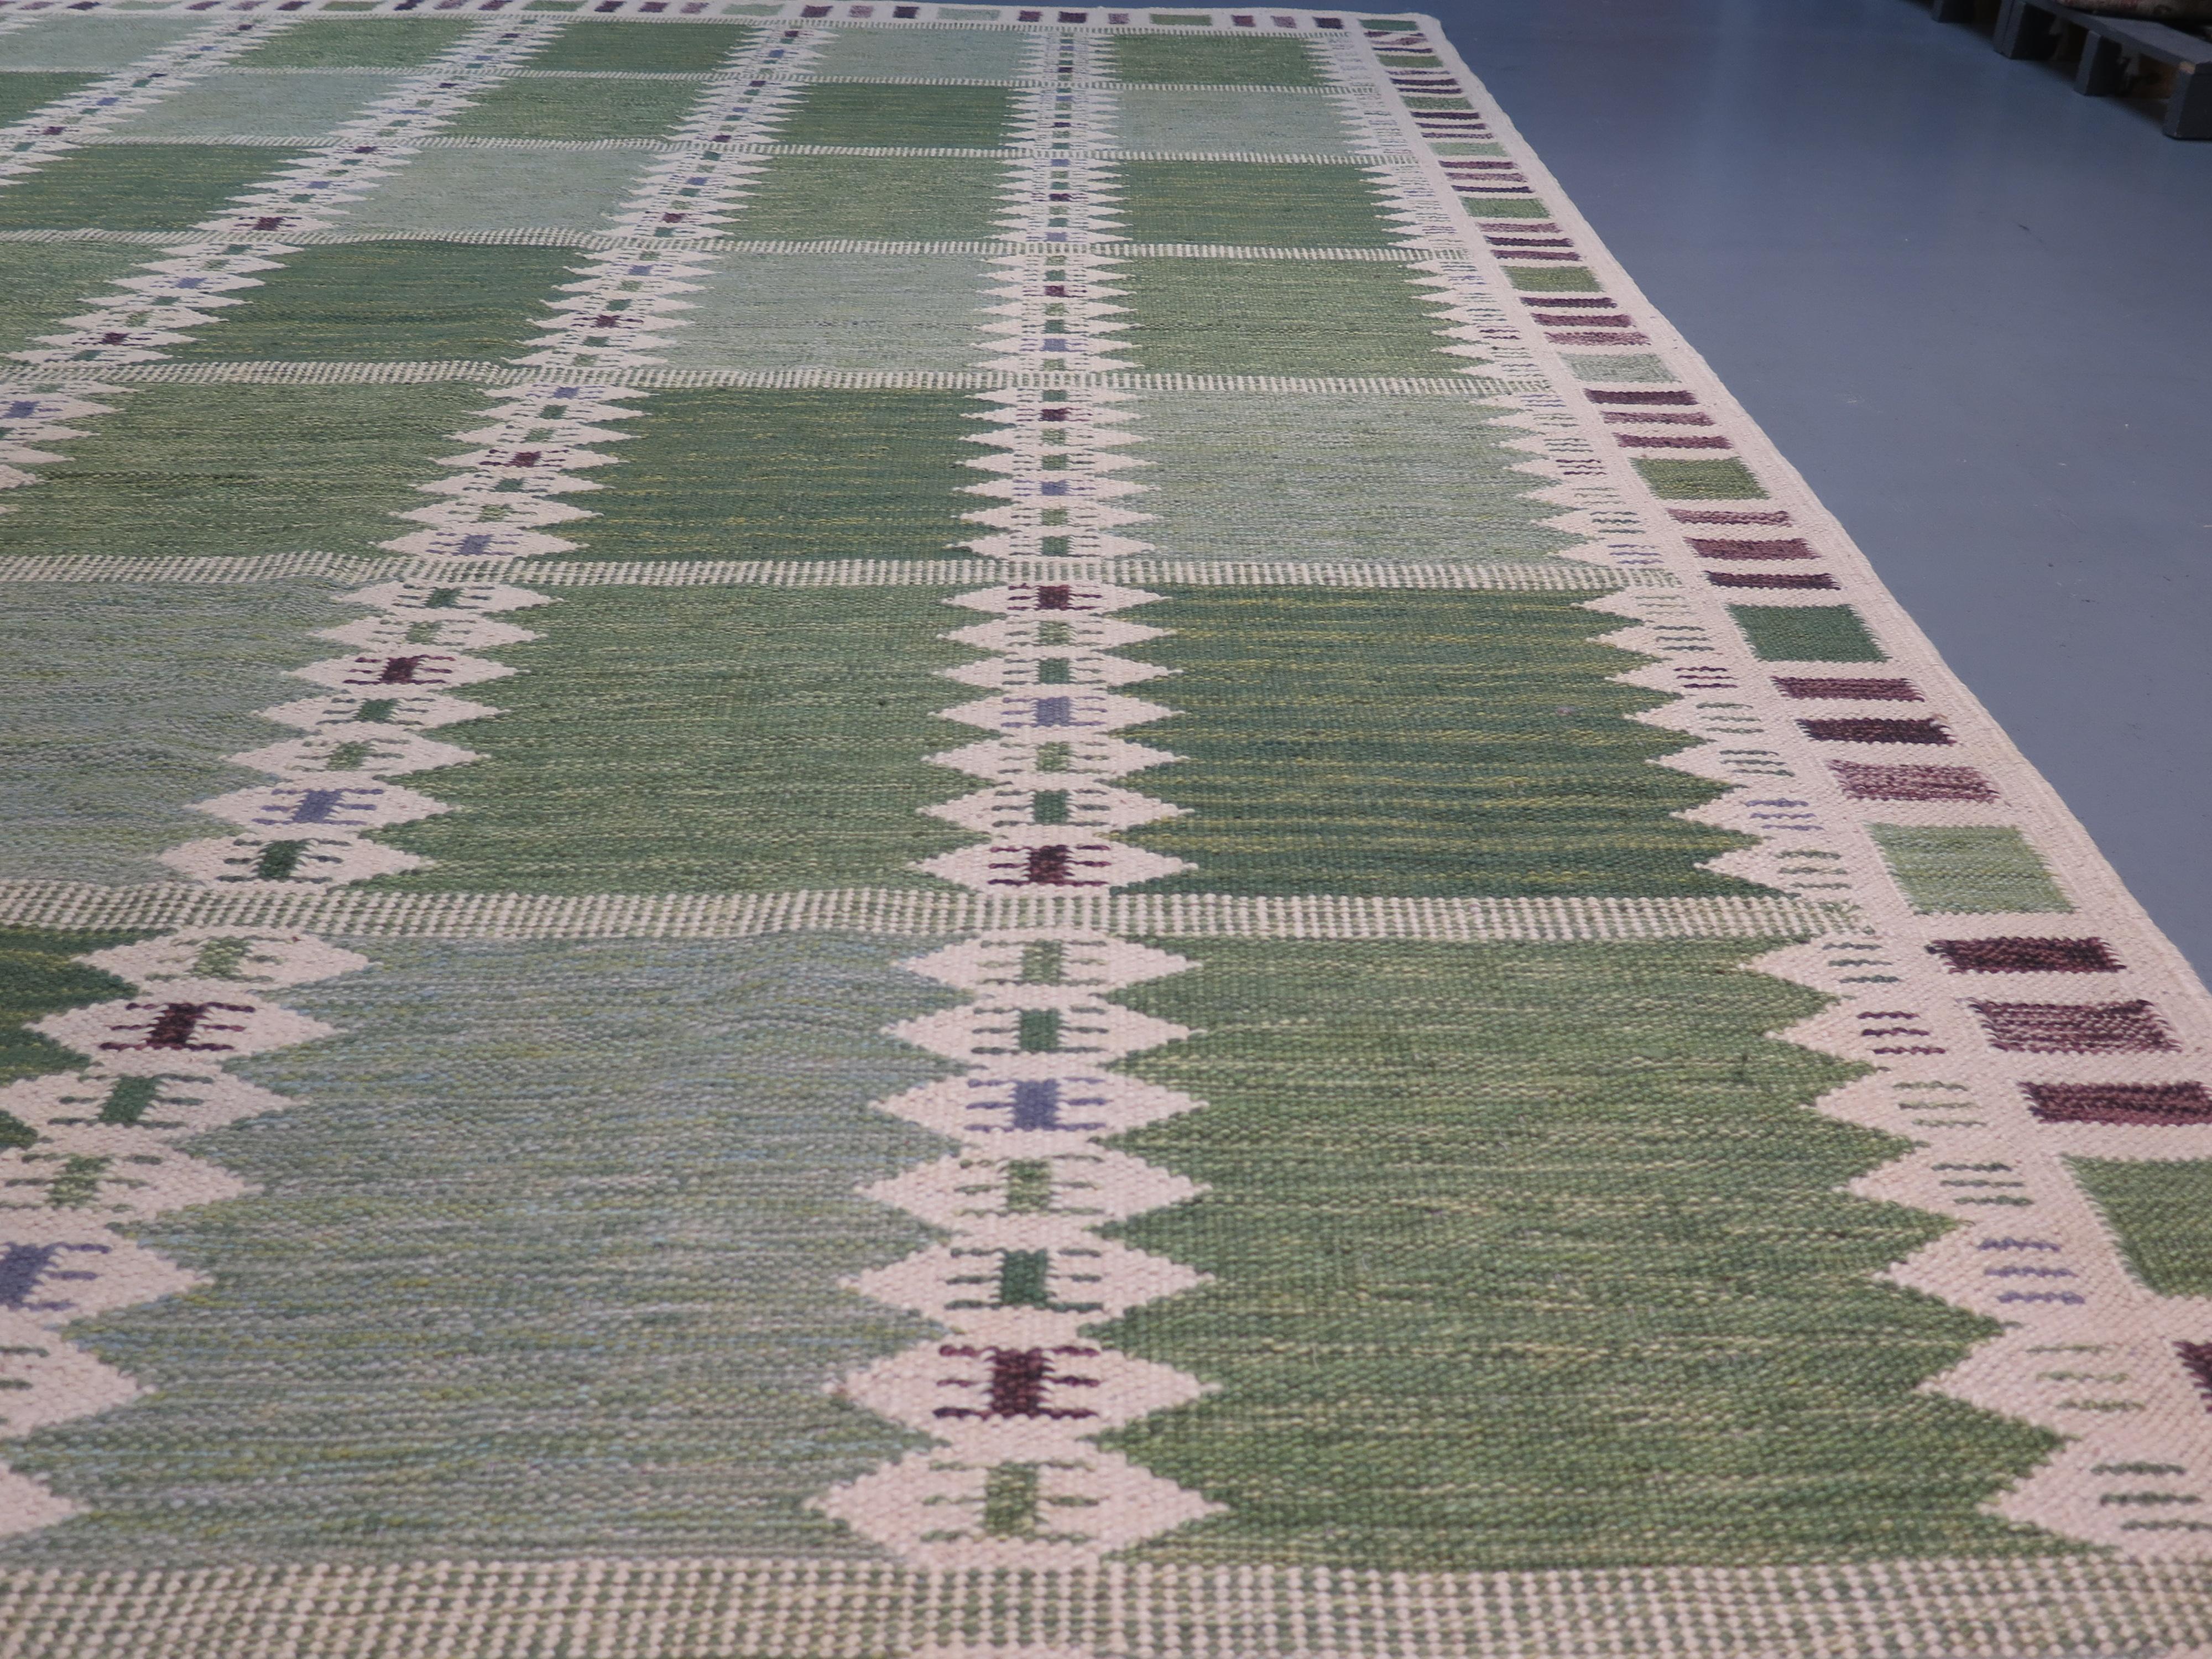 Flatweave carpets - known as röllakan - have been woven in Sweden since the 17th Century or earlier, but experienced a particular revival in the mid-20th Century, incorporating elements of both mid-century modern and folk design. These pieces are